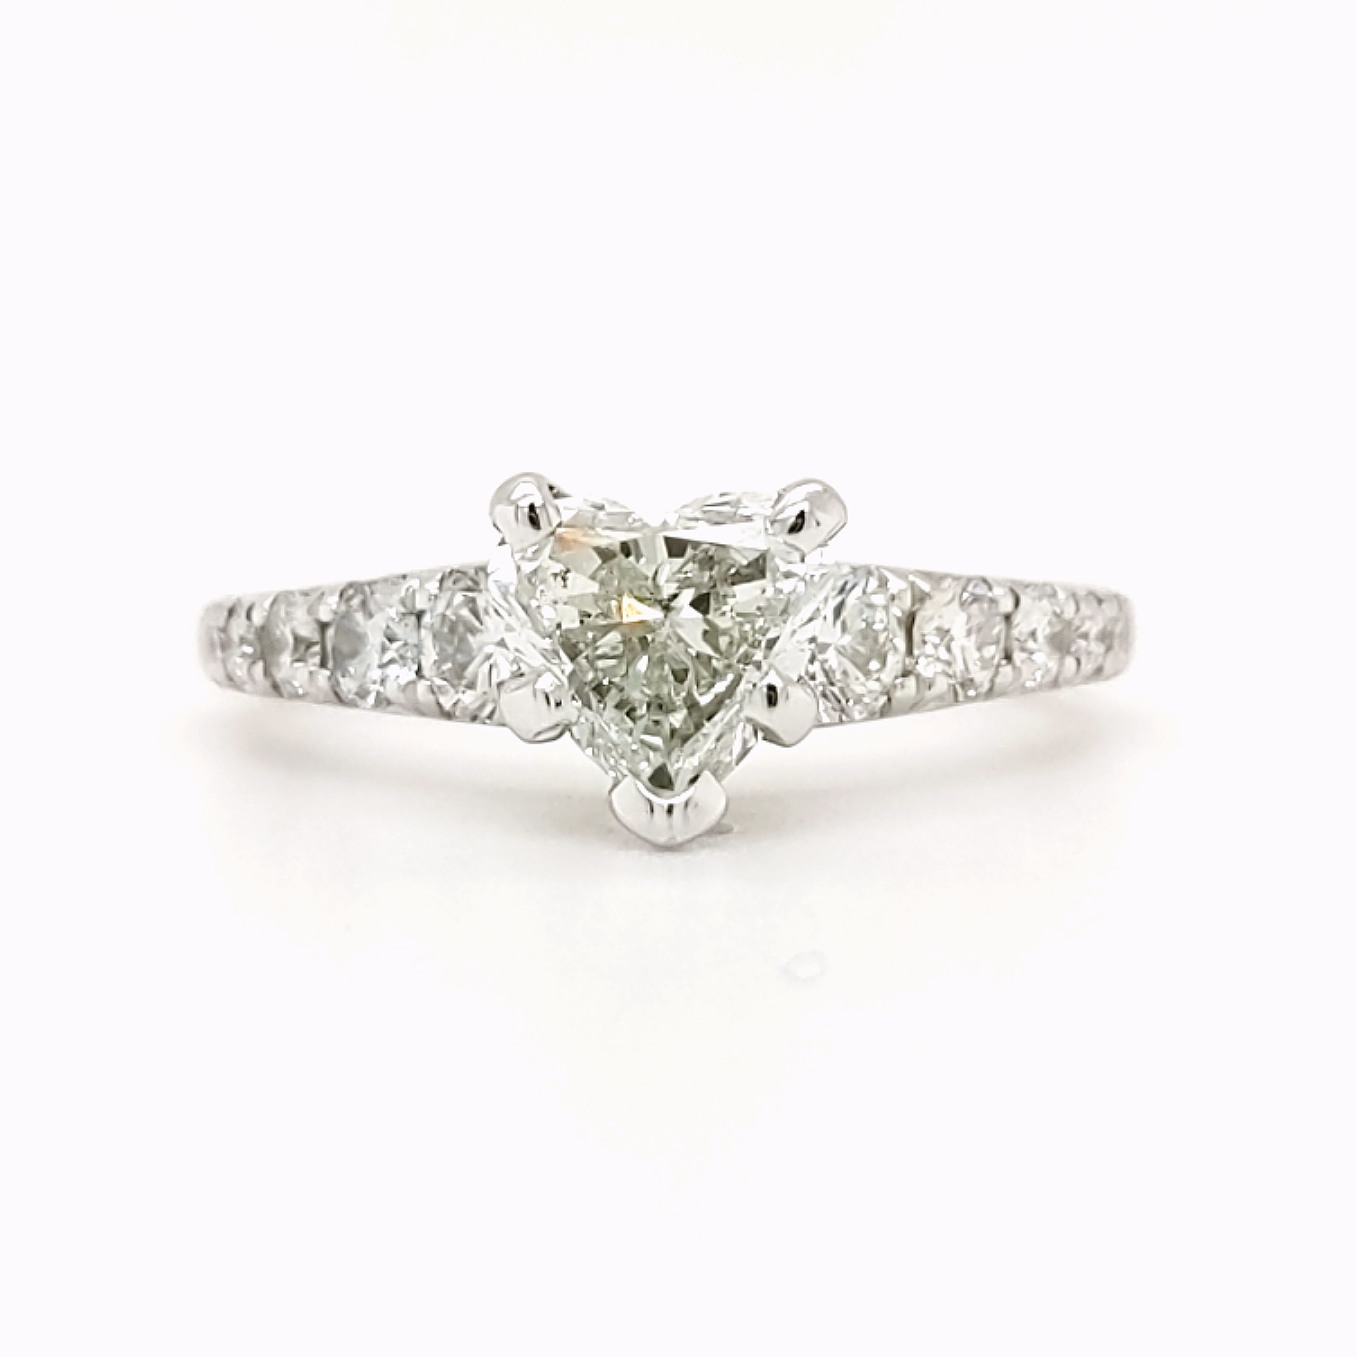 14K White Gold 1.01ct H-Si1 Heart-Shaped Diamond Ring with .50ctw RBC melee QA+E $8735.00 - finger size 5.75